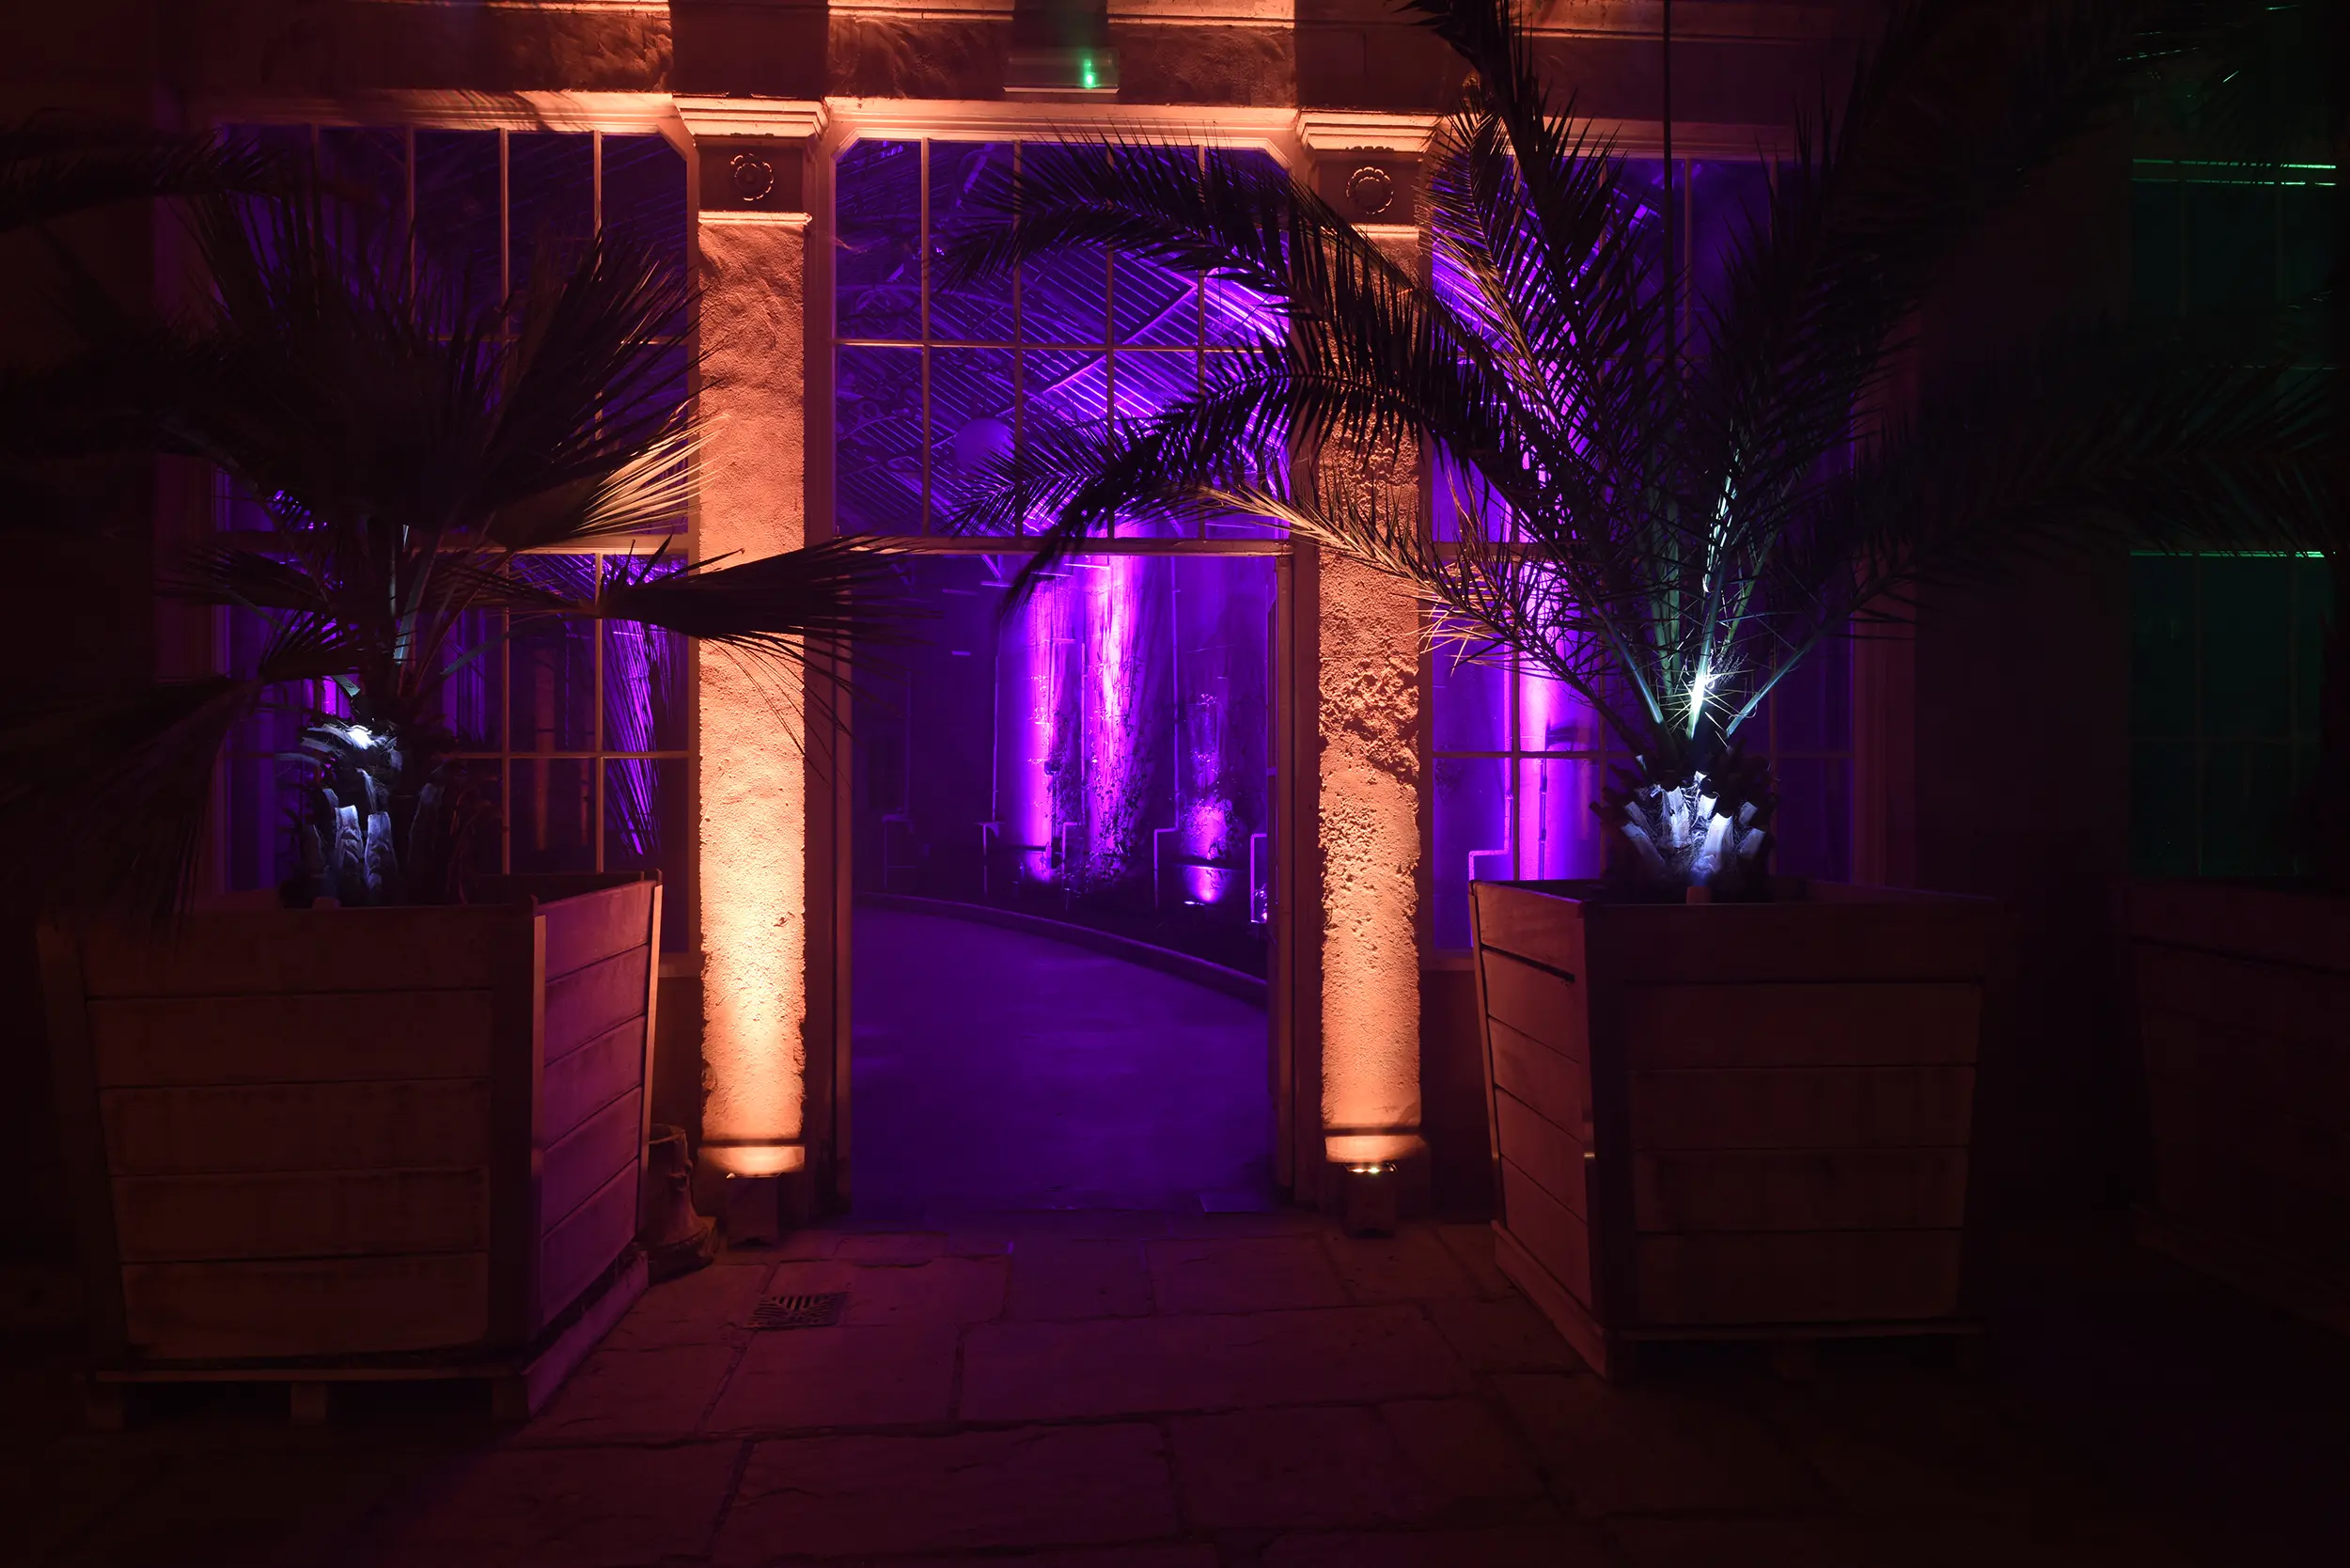 The Conservatory at Syon Park